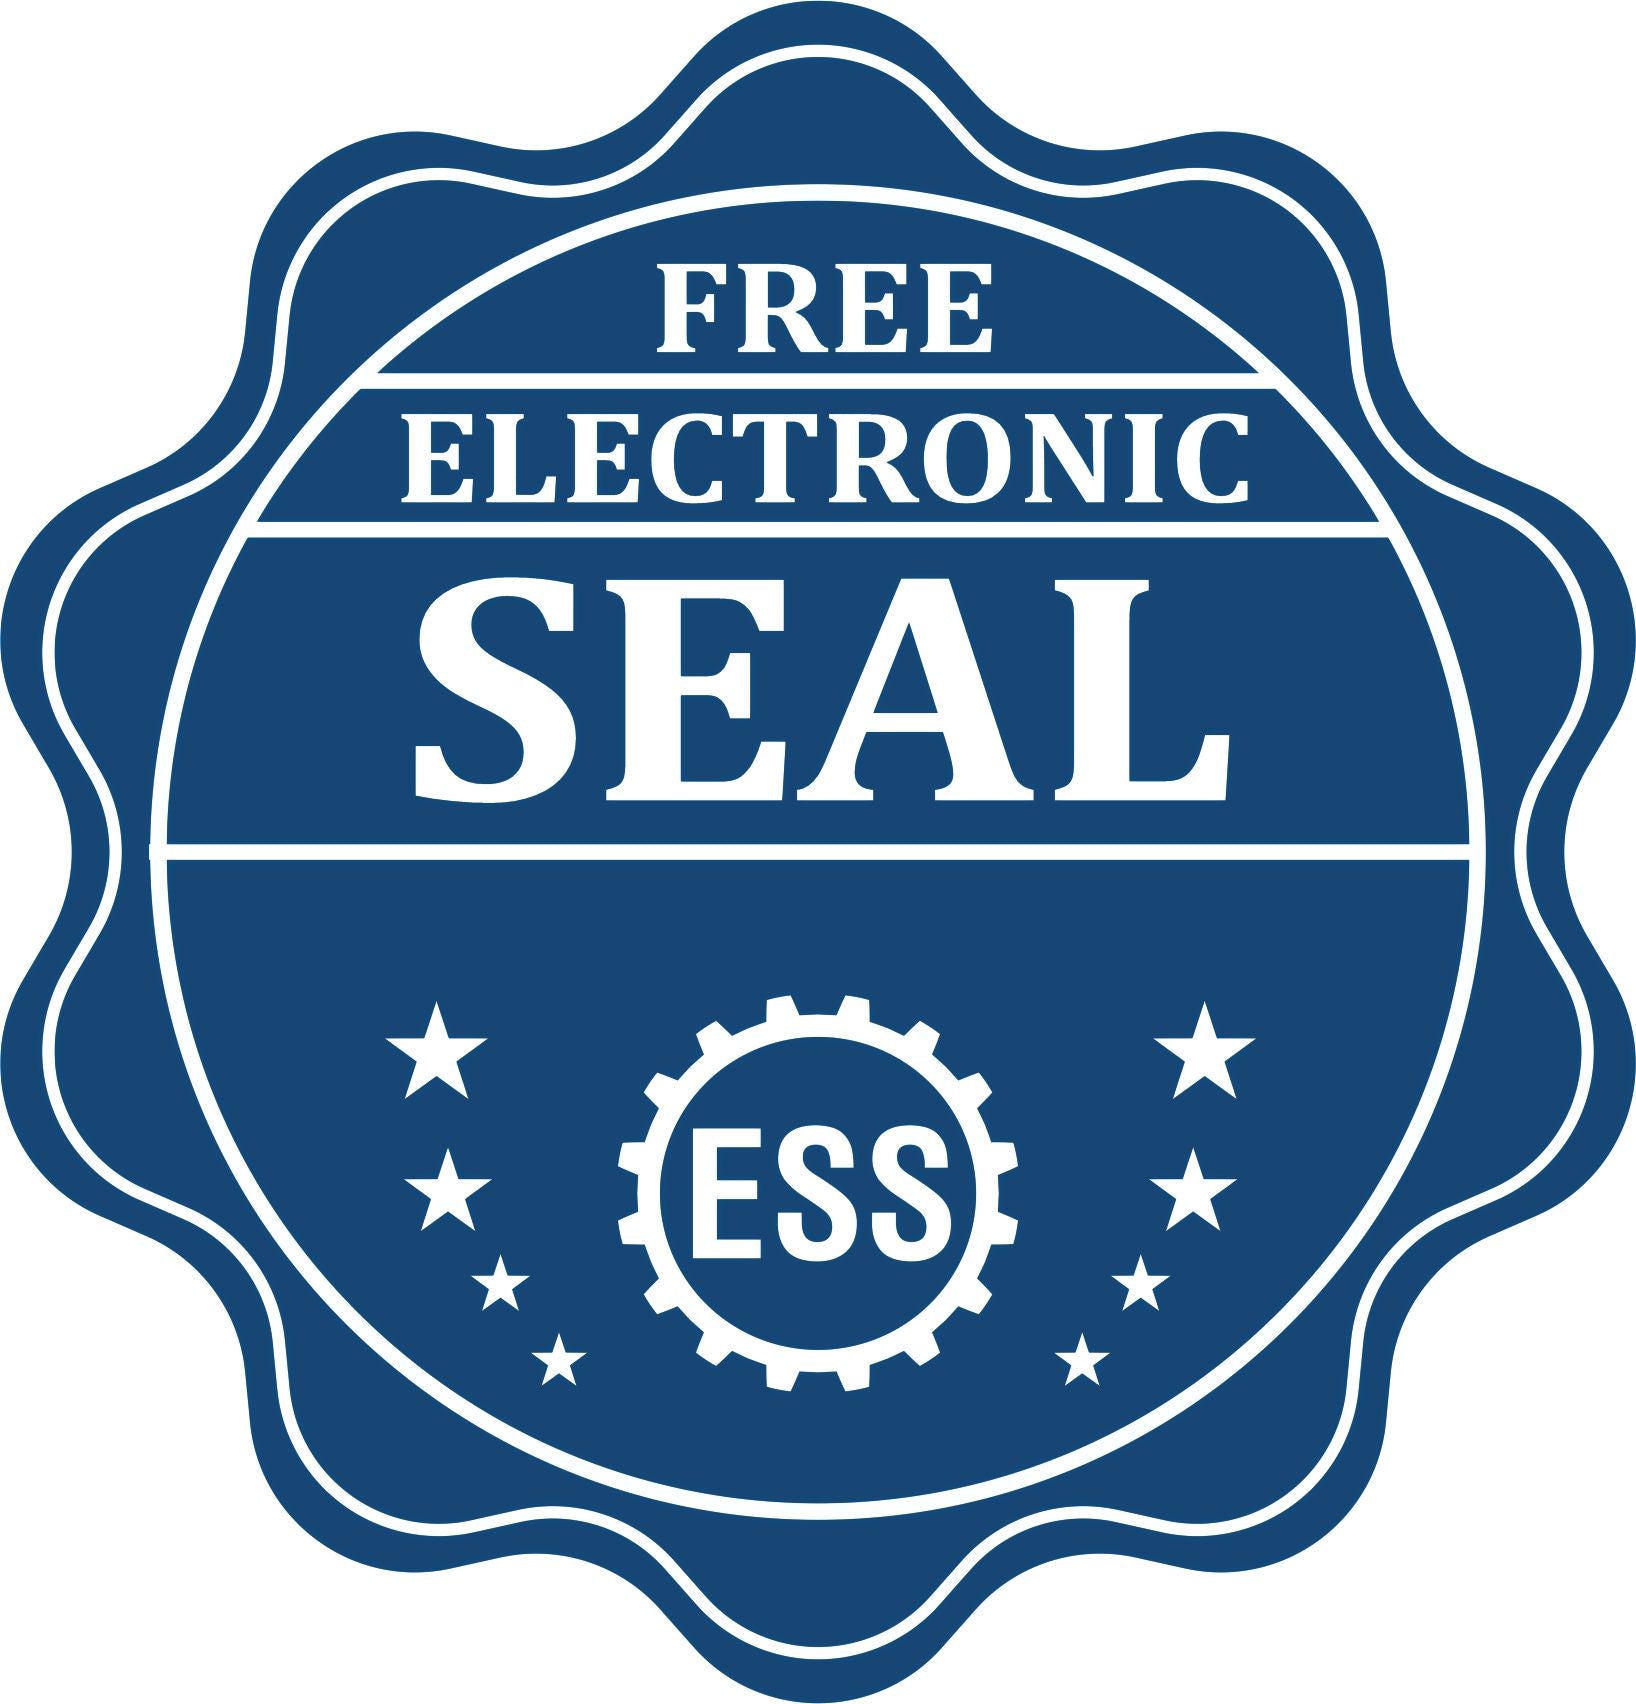 A badge showing a free electronic seal for the Heavy Duty Cast Iron Michigan Architect Embosser with stars and the ESS gear on the emblem.